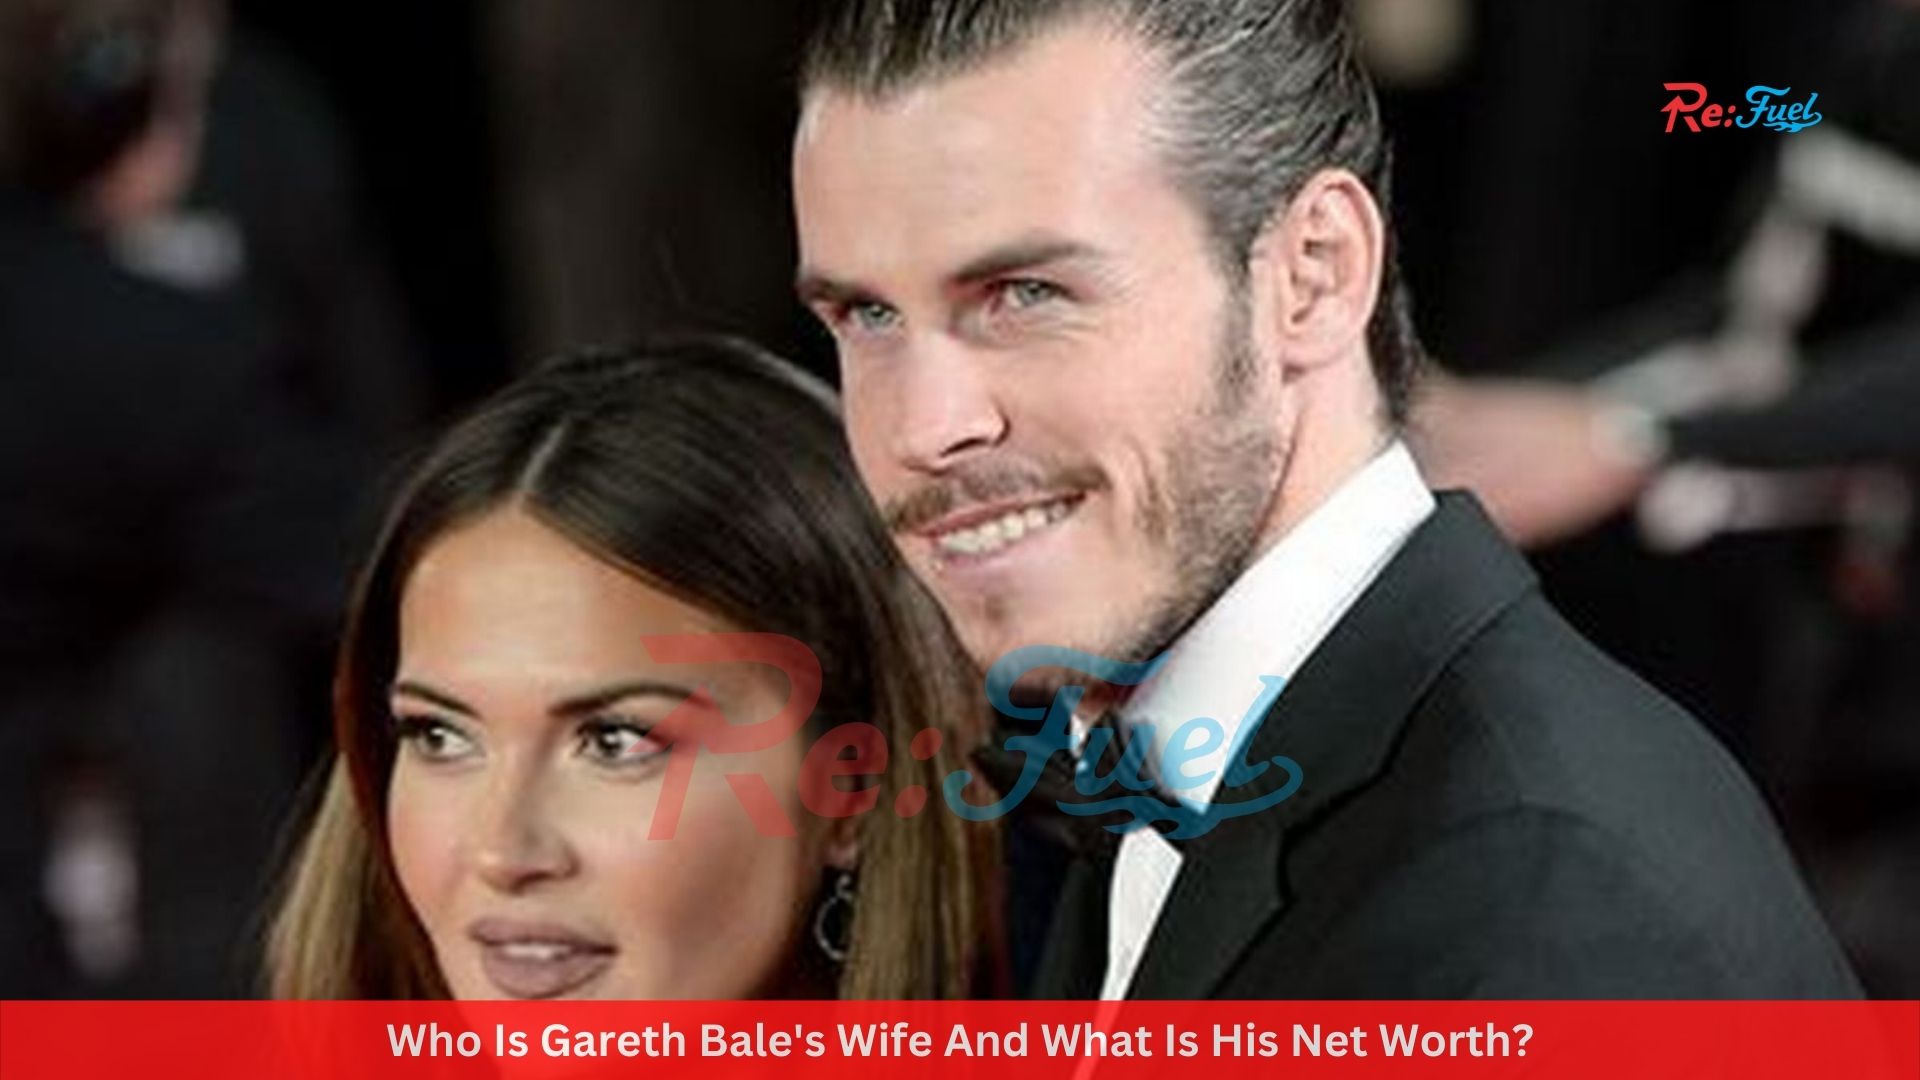 Who Is Gareth Bale's Wife And What Is His Net Worth?